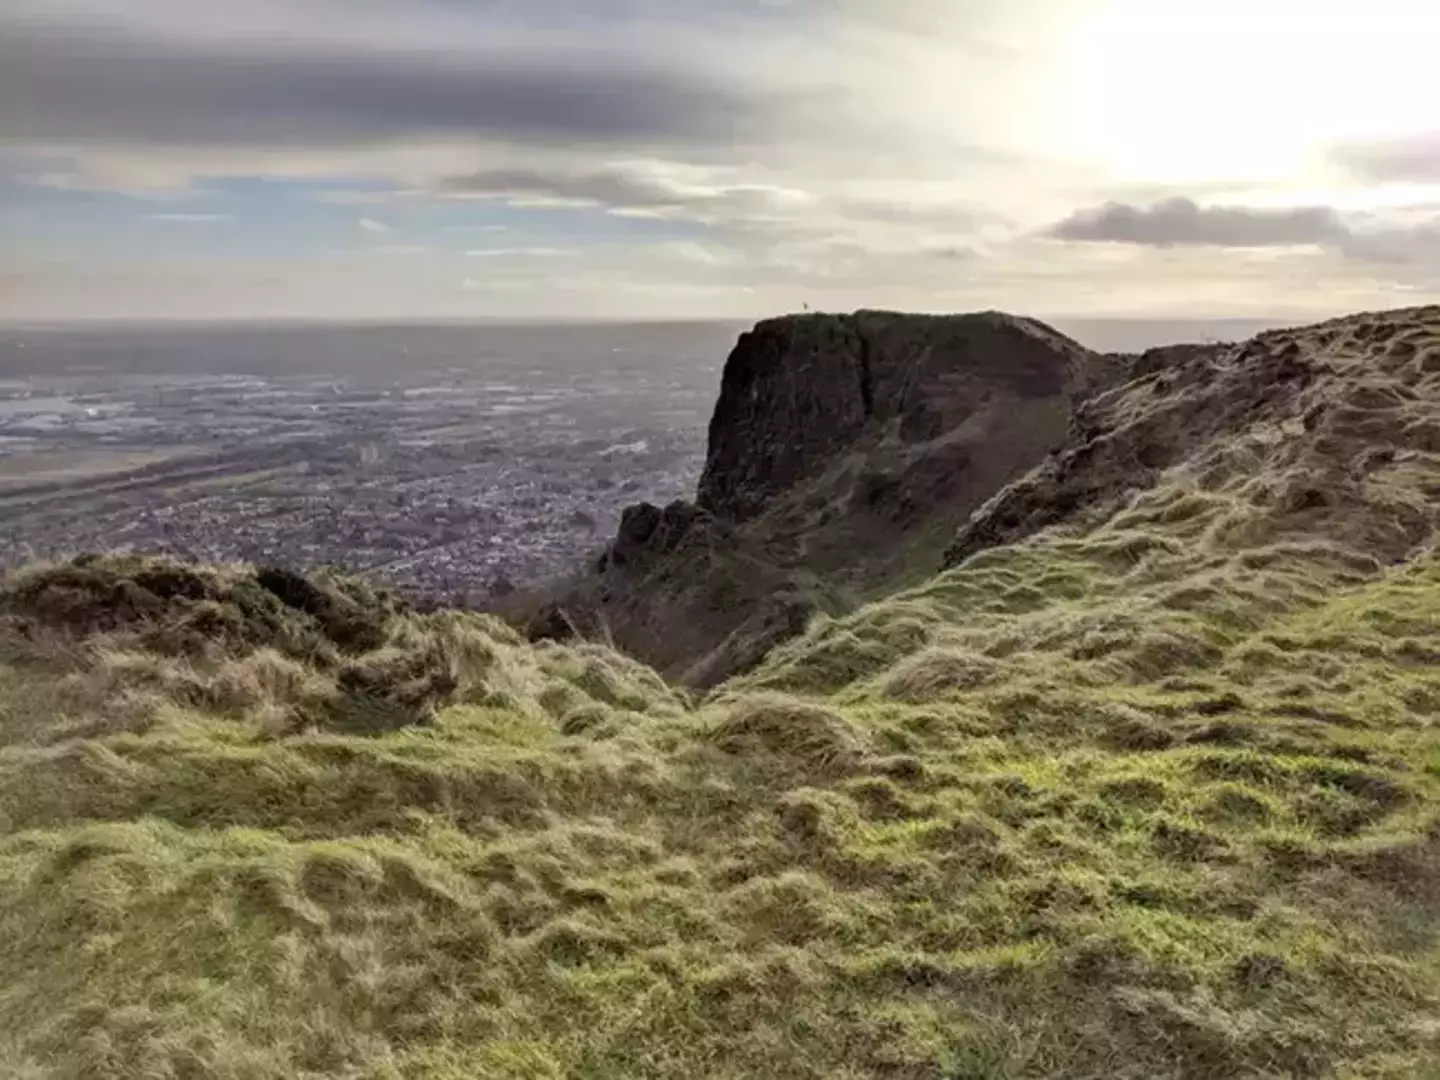 Gavin Best shared one of his photos from a hike out atop Cavehill, in Belfast, Northern Ireland.